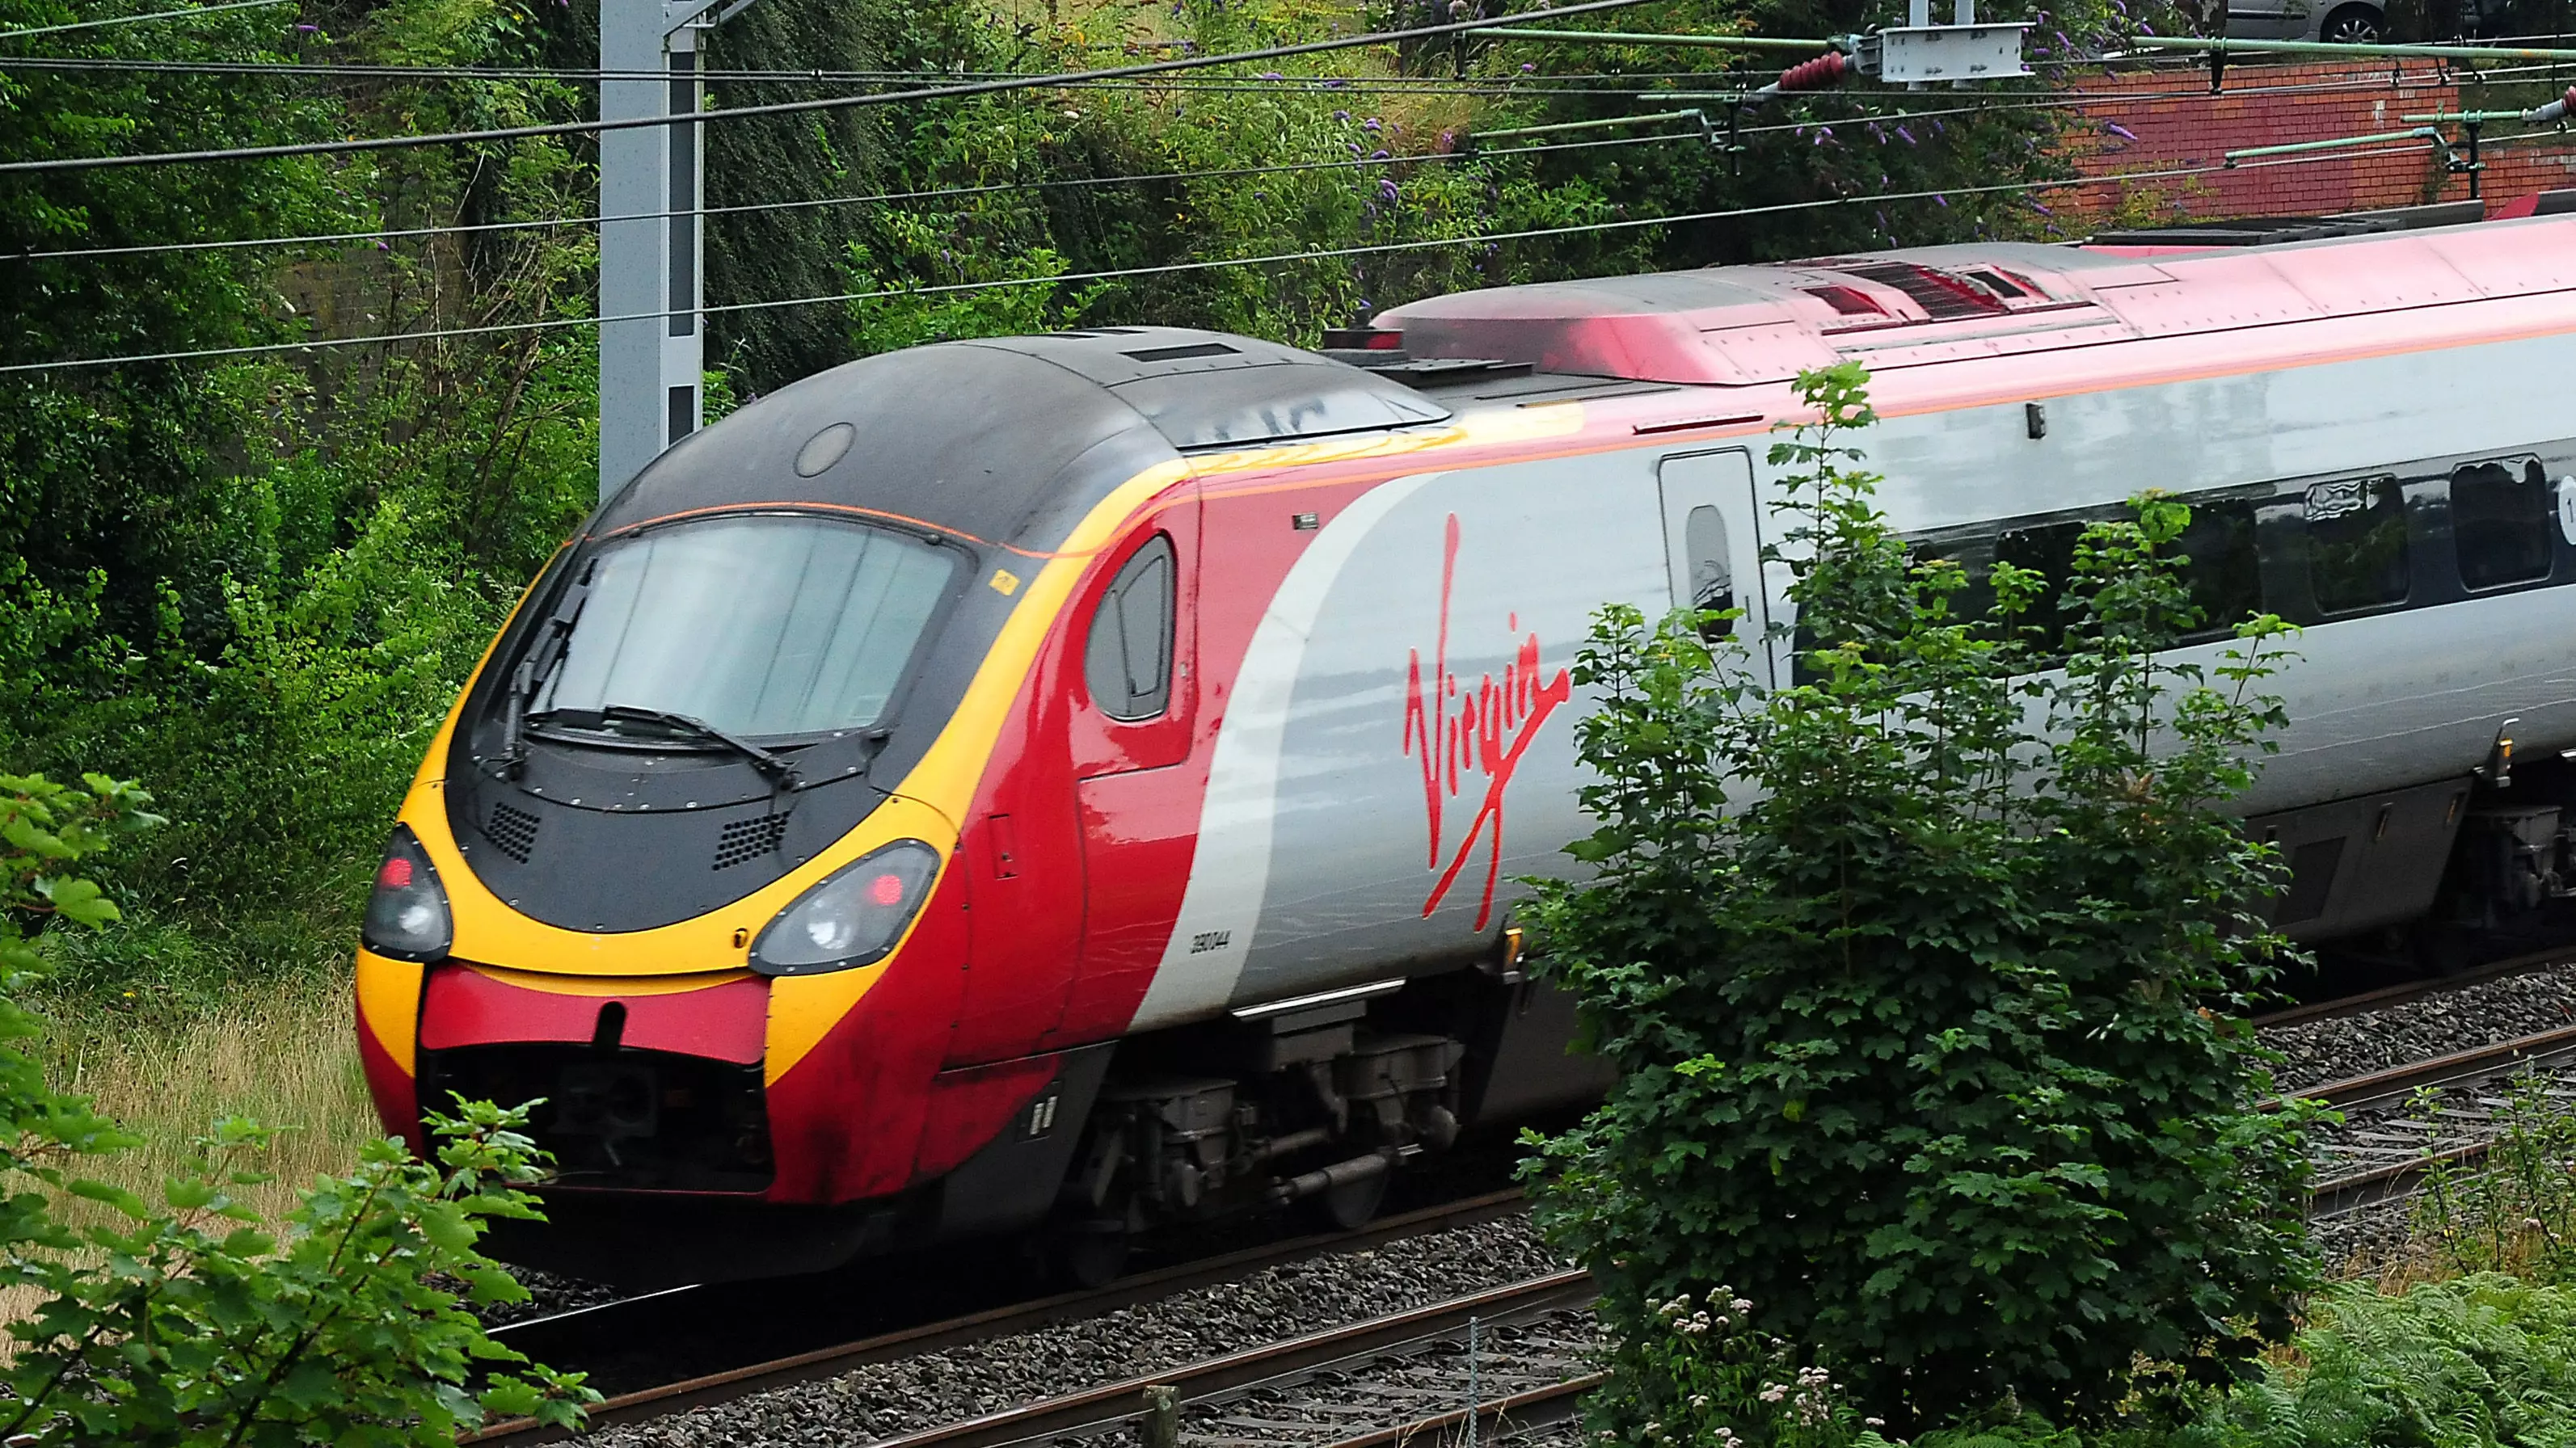 Virgin Wants To Ban Standing On Its Trains With New Booking System